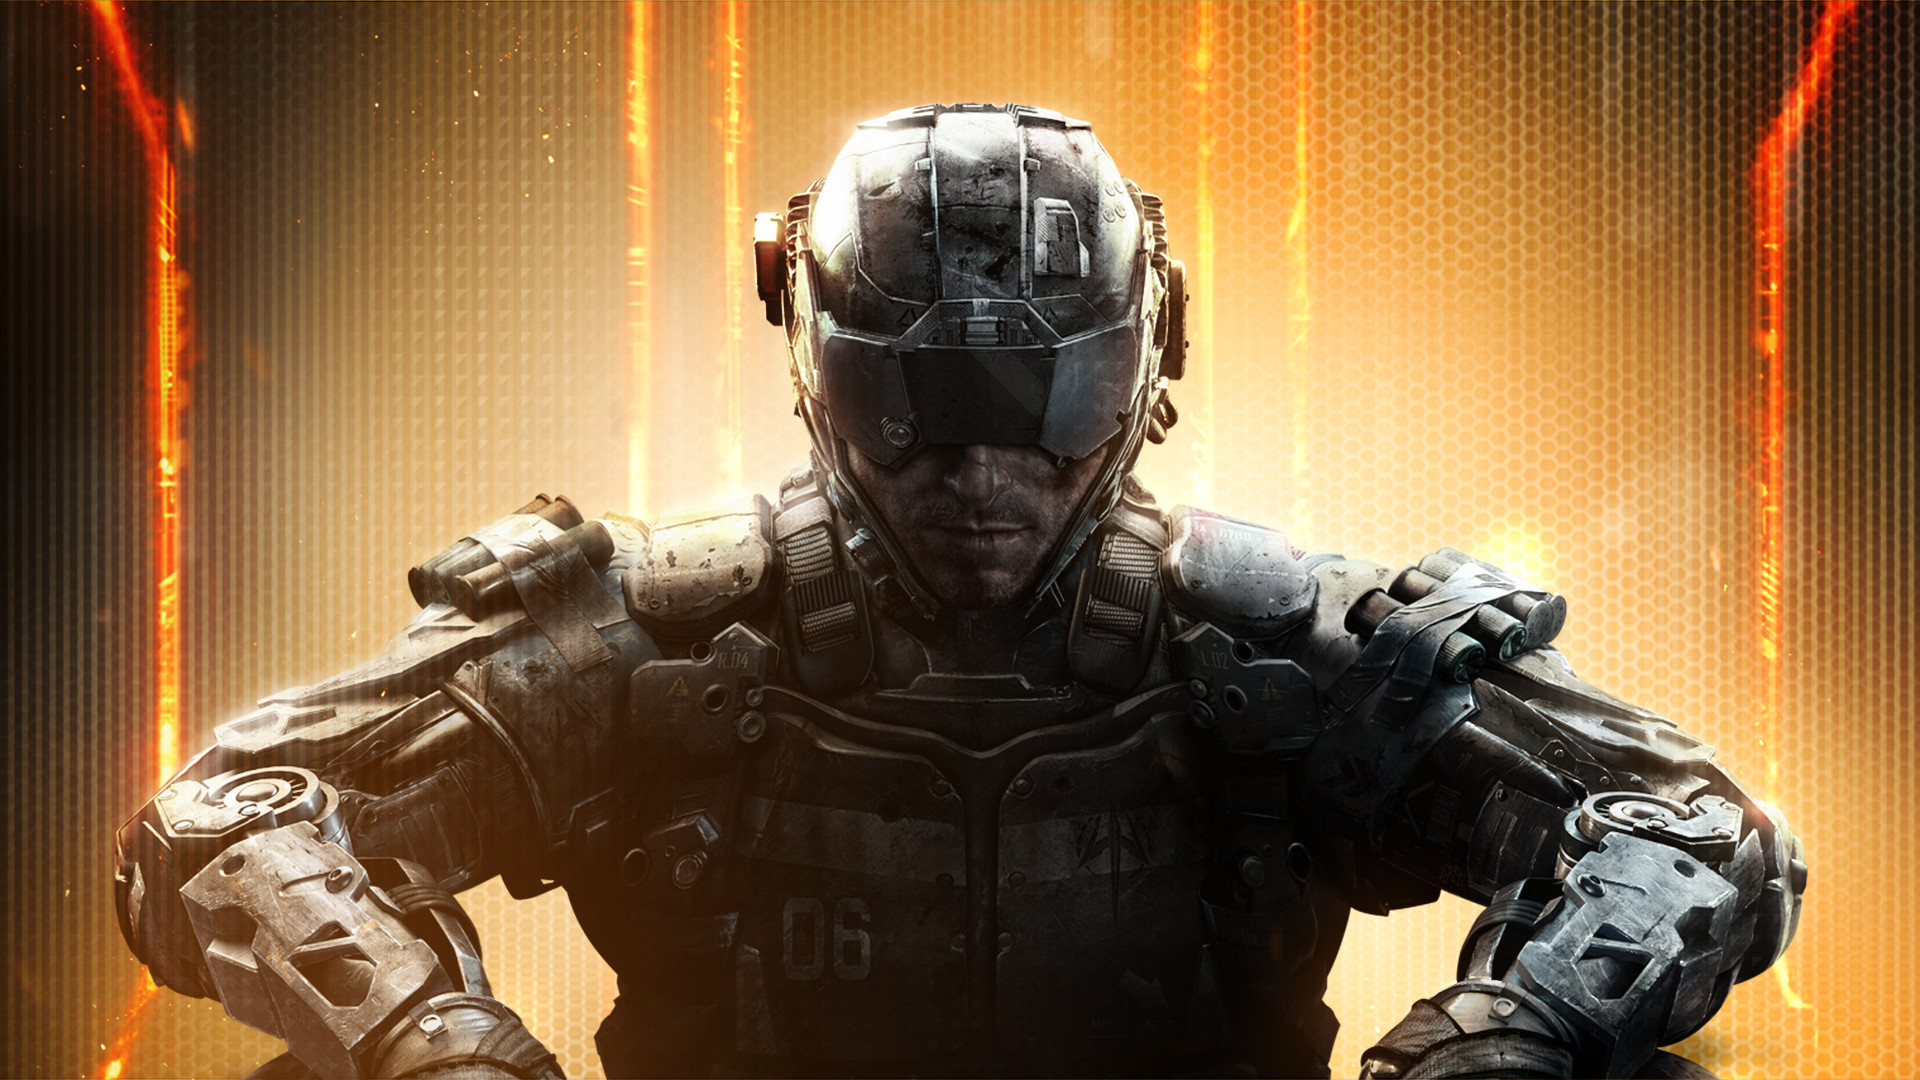 1920x1080 Call of Duty: Black Ops 3 Campaign Gets The Cut On Xbox 360 & PlayStation 3